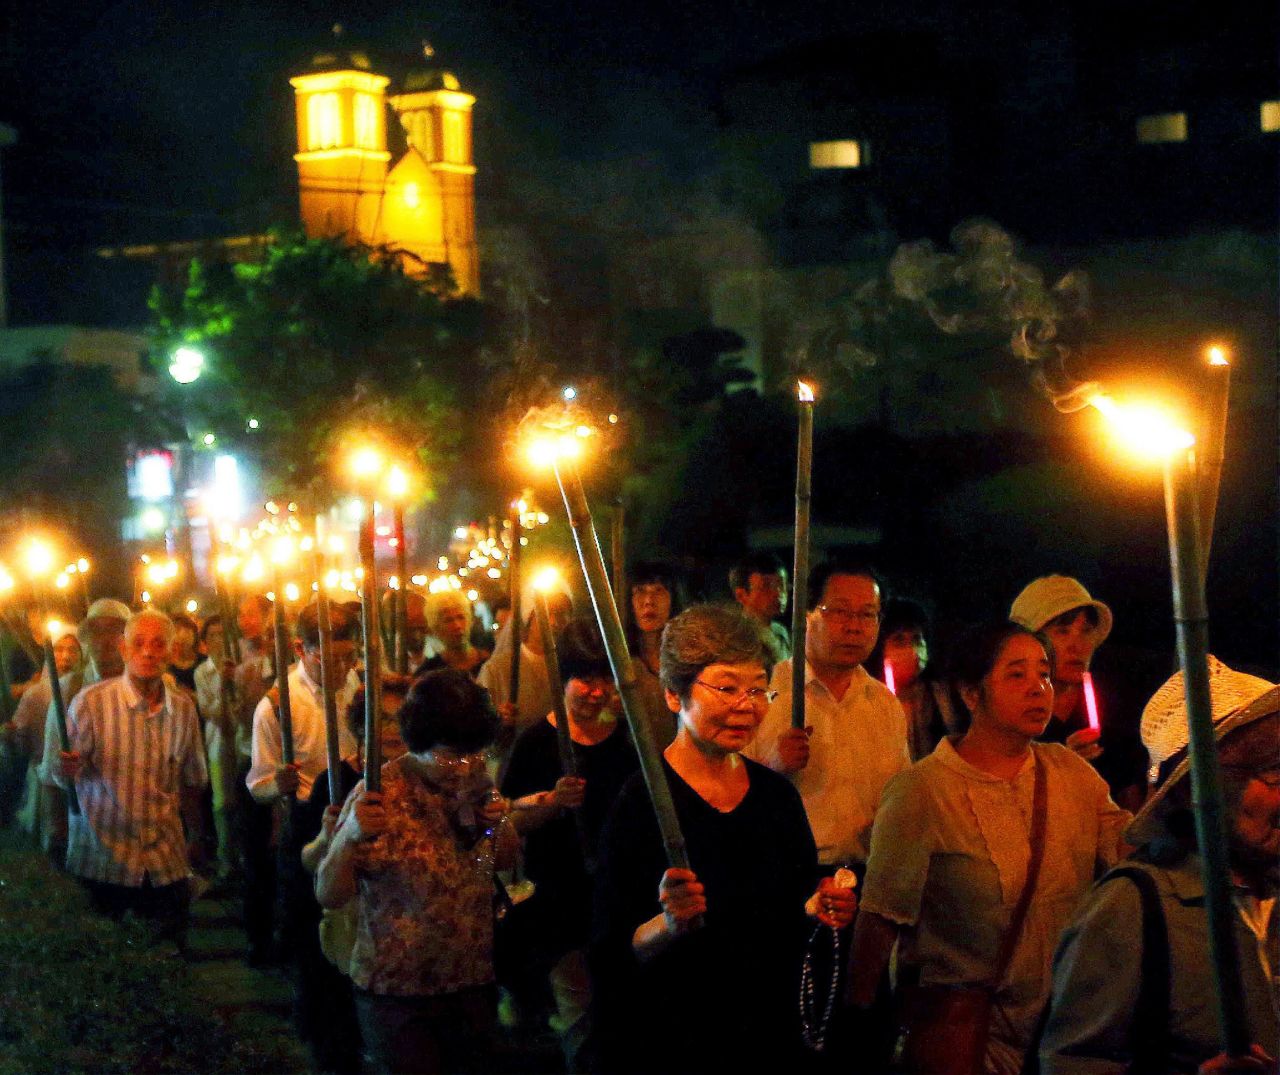 Catholics hold bamboo torches during a peace march from the Urakami Cathedral toward the Peace Memorial park in Nagasaki, Japan, on Sunday, August 9, 2015. Seventy years ago, the United States <a href="http://www.cnn.com/2015/08/04/world/gallery/atomic-bomb-hiroshima-nagasaki/index.html" target="_blank">dropped atomic bombs on the cities of Hiroshima and Nagasaki.</a> The devastation led to Japan's surrender and brought an end to World War II.